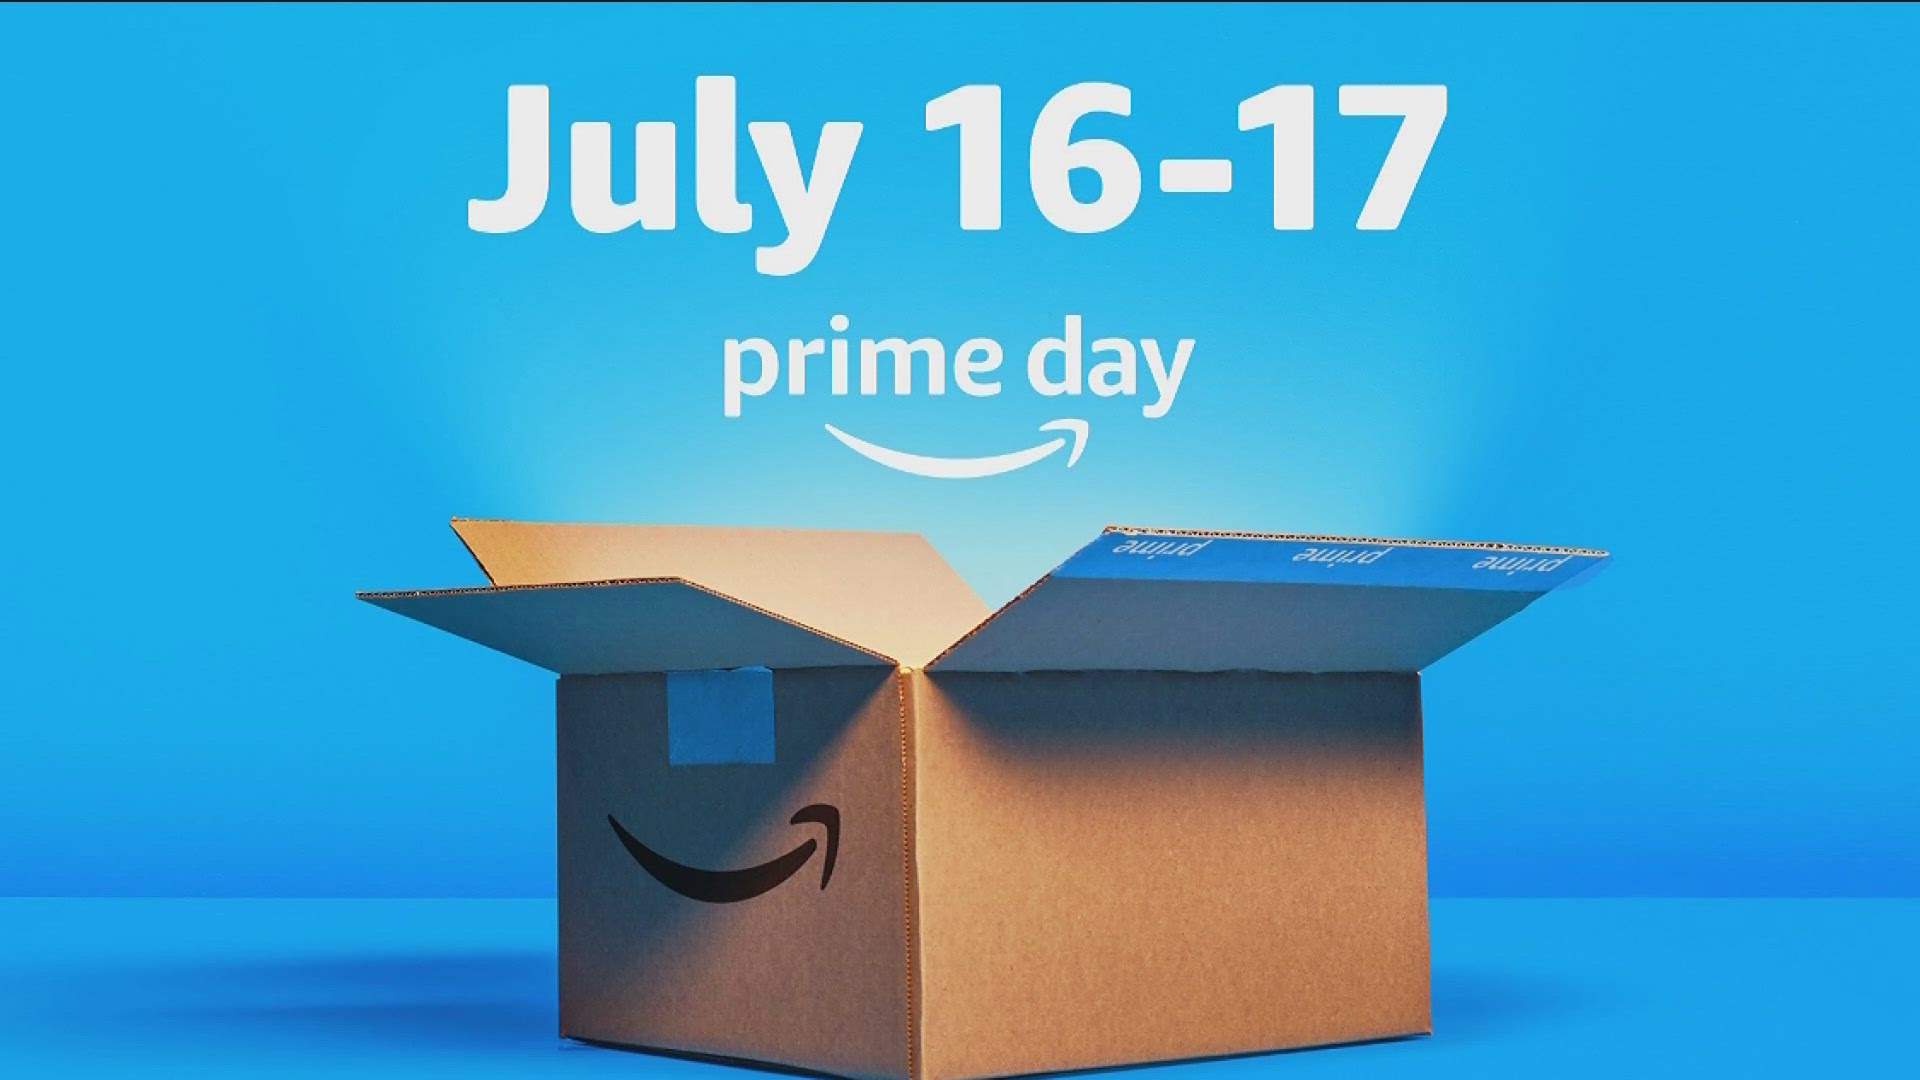 Amazon has announced the 10th Prime Day will be on July 16 and 17.